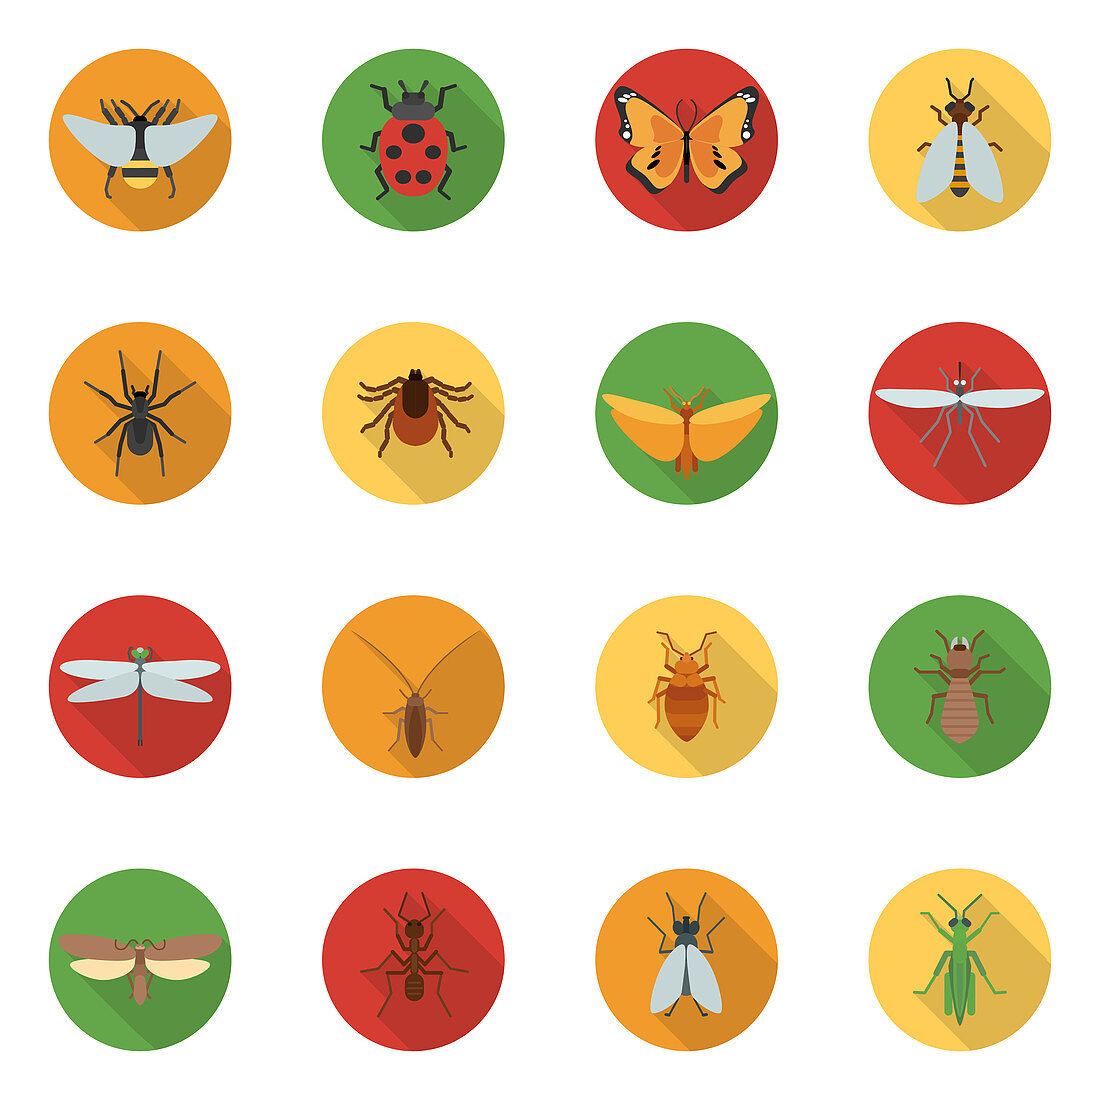 Insect icons, illustration